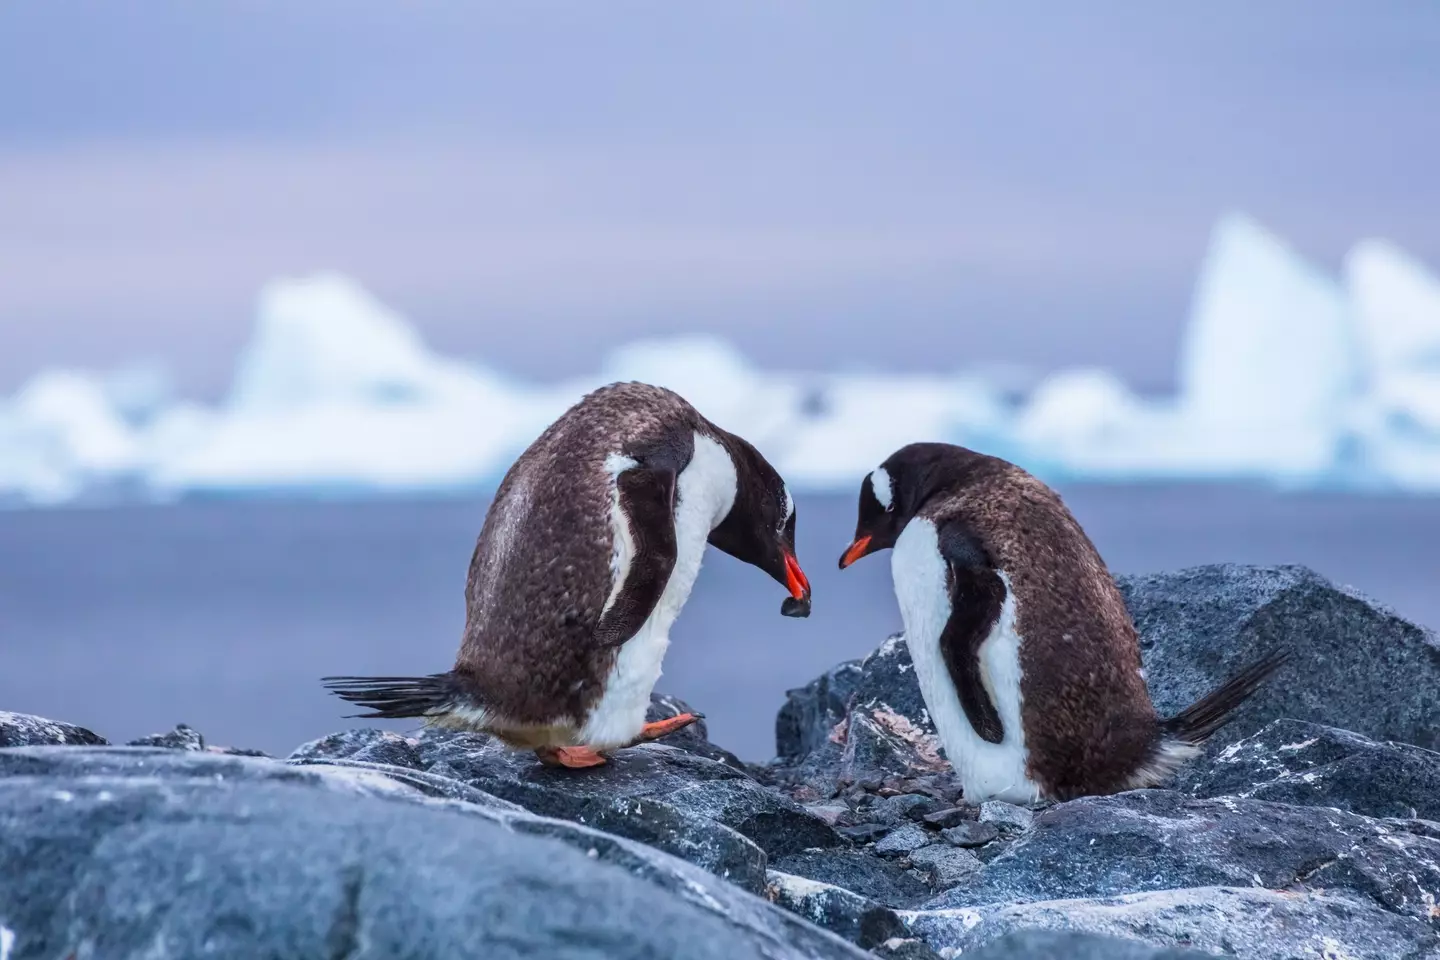 Pebbling is inspired by the behaviour of penguins. (Getty Images/NicoElNino)